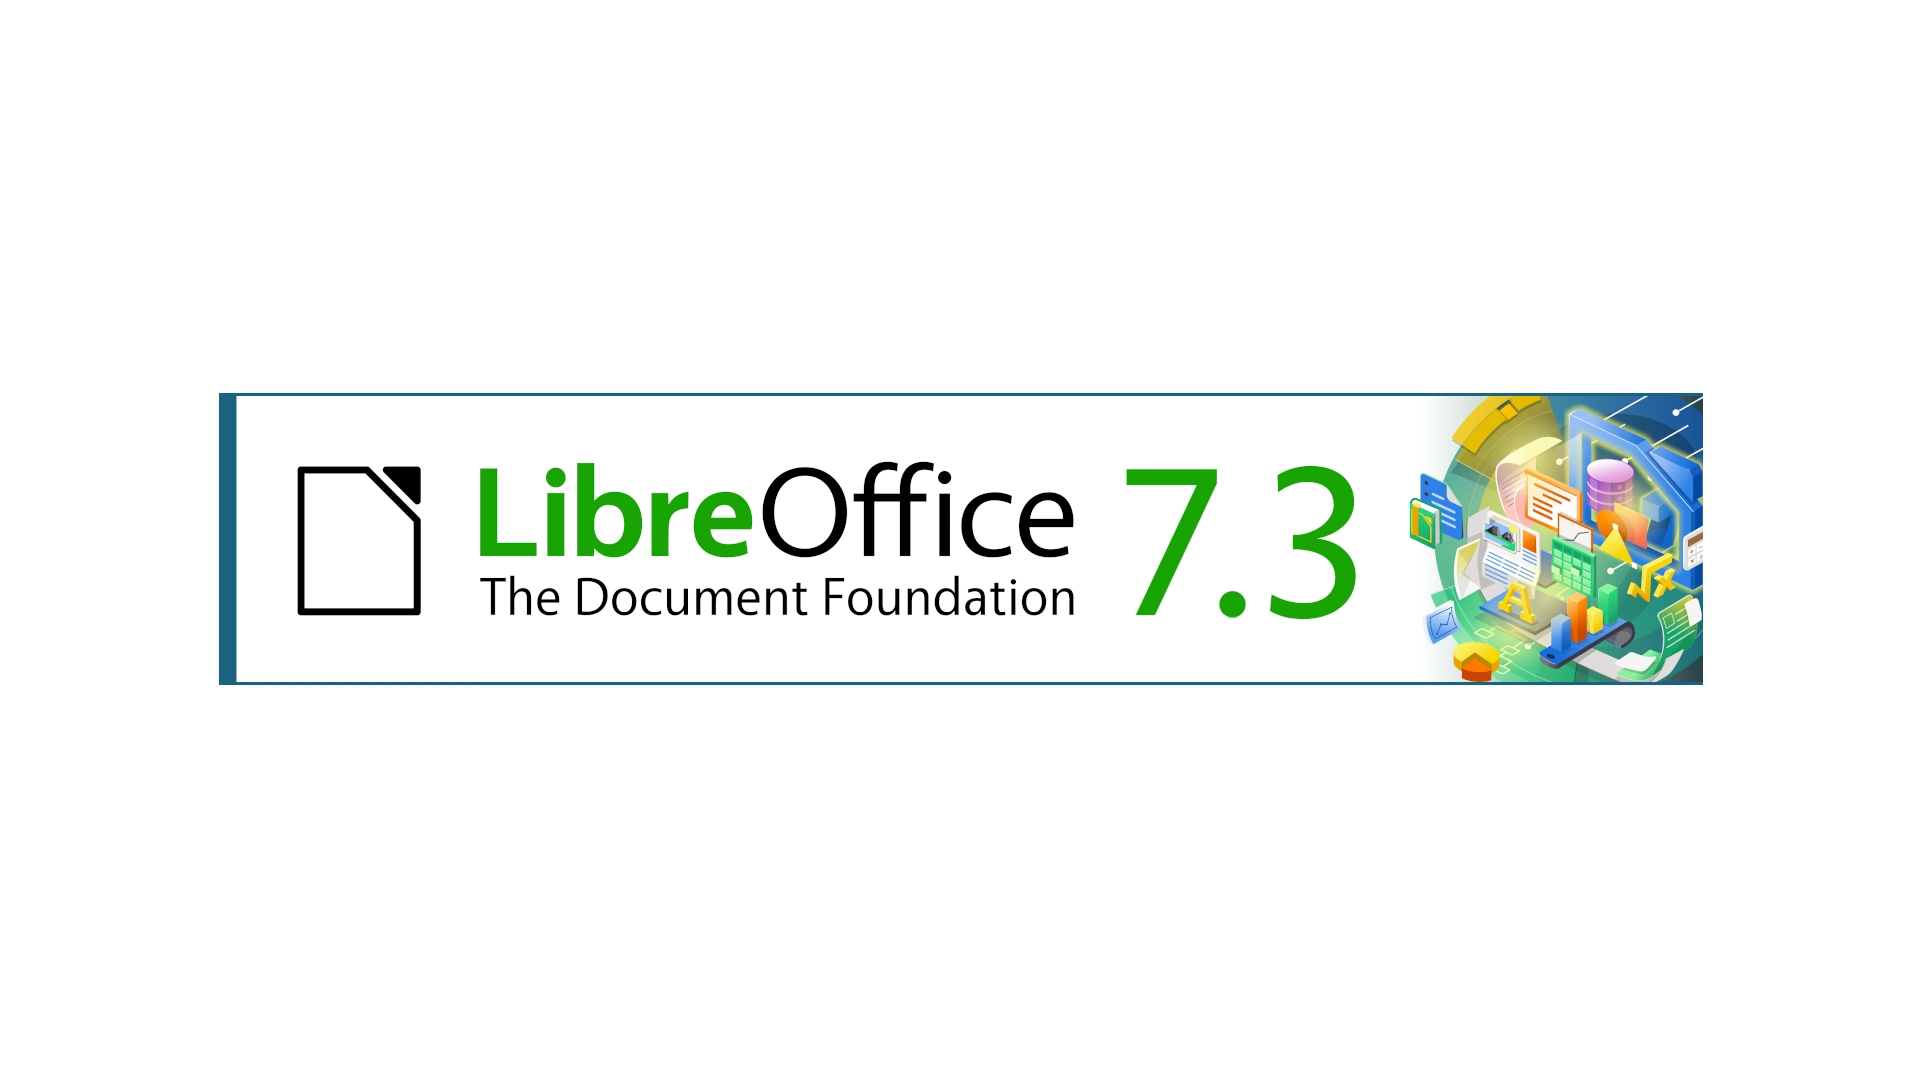 LibreOffice 7.3.2 Office Suite Is Now Available for Download with 74 Bug Fixes